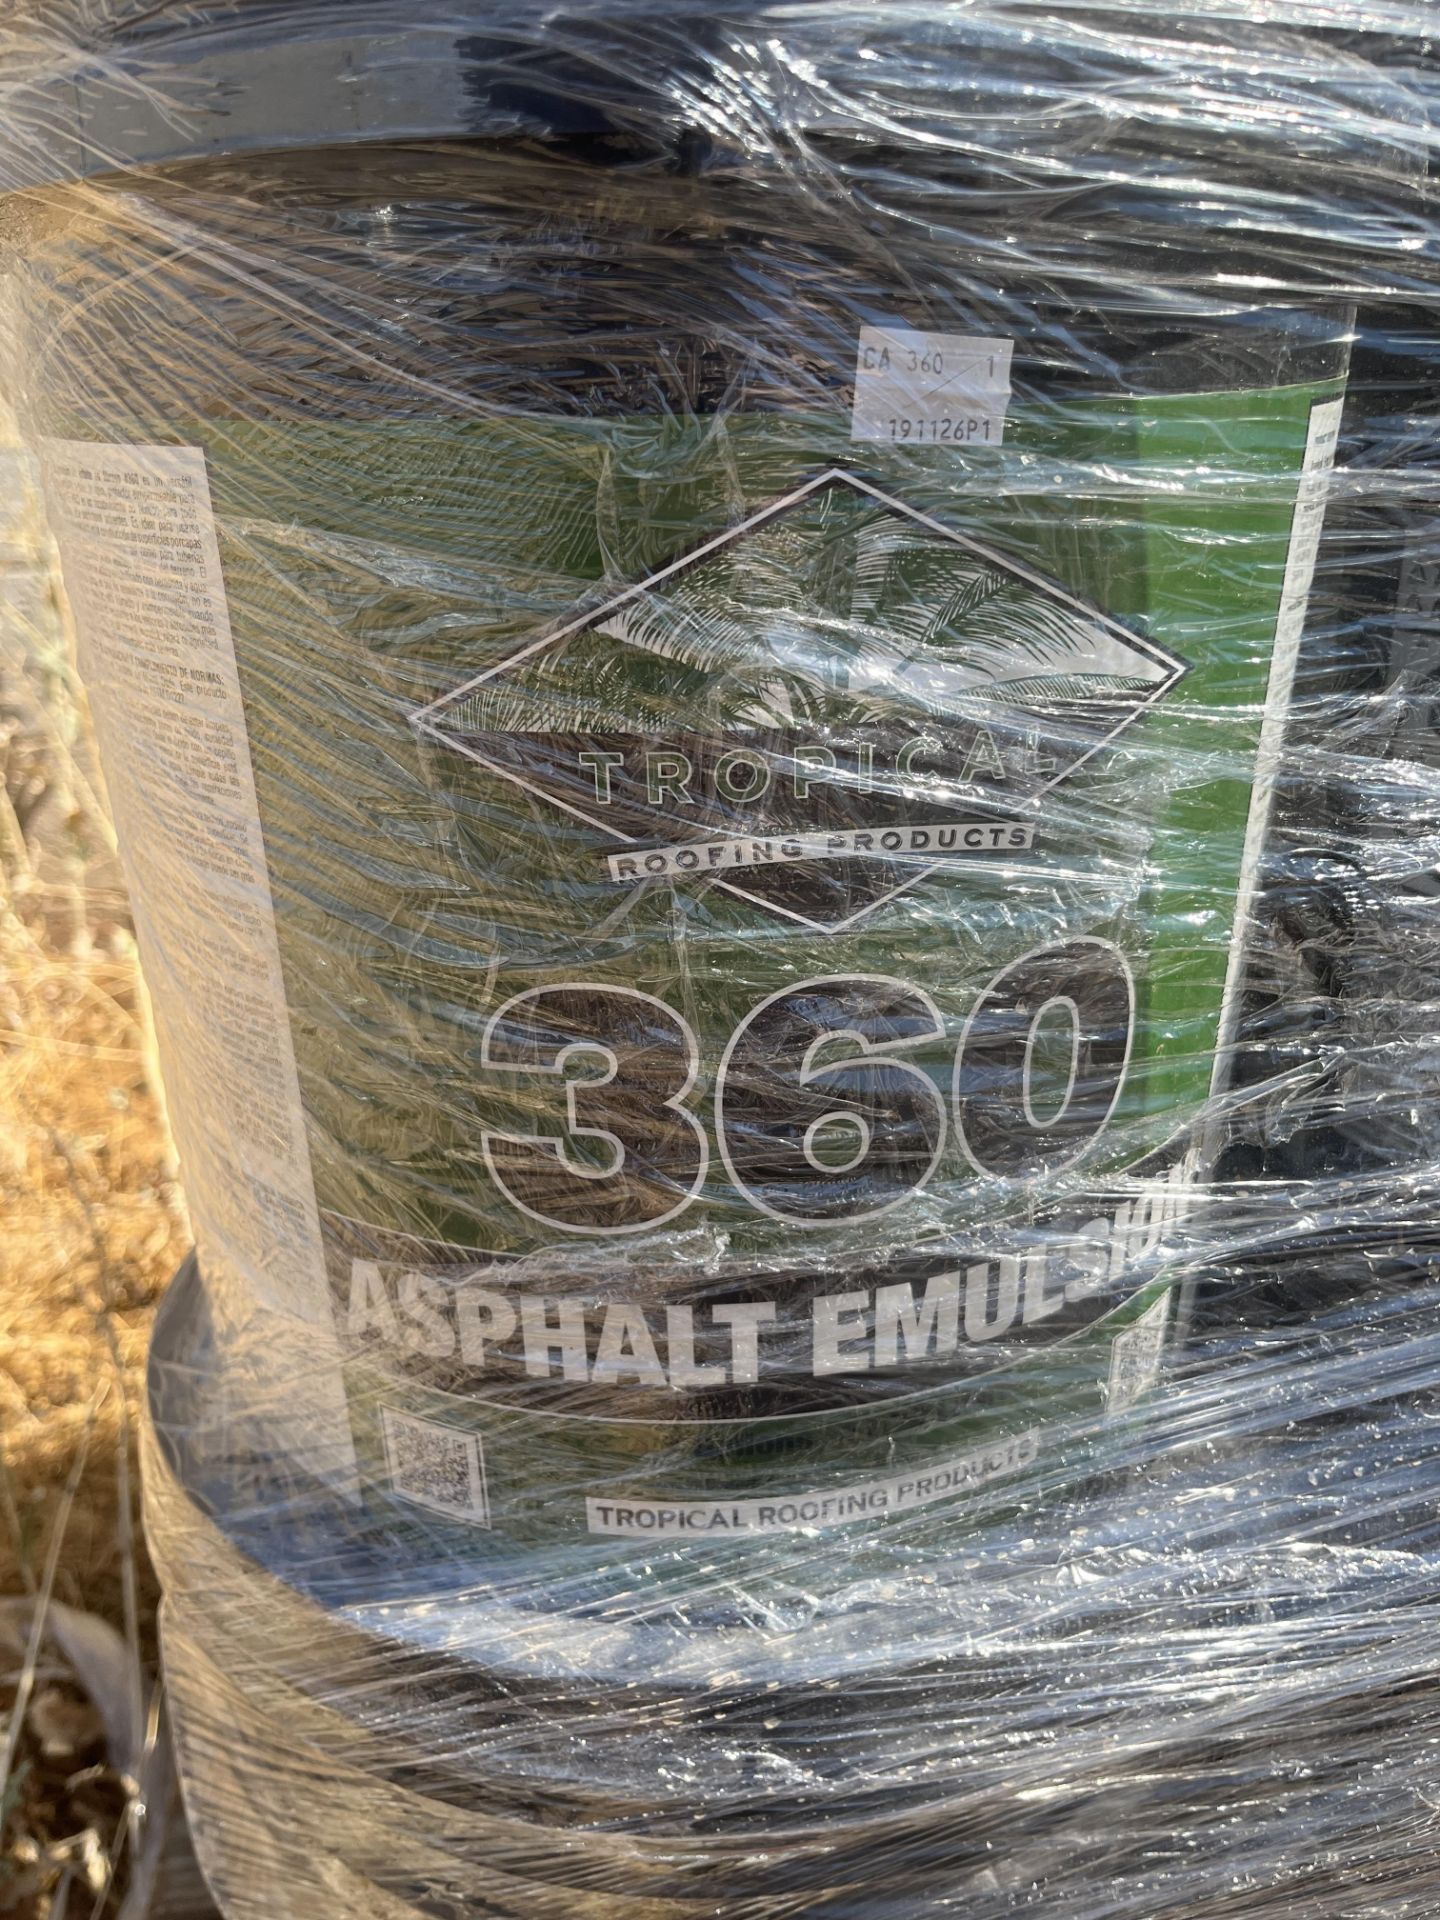 LOT PALLET OF TROPICAL ROOFING PRODUCTS 360 ASPHALT EMULSION, 5 GAL BUCKETS - Image 2 of 2